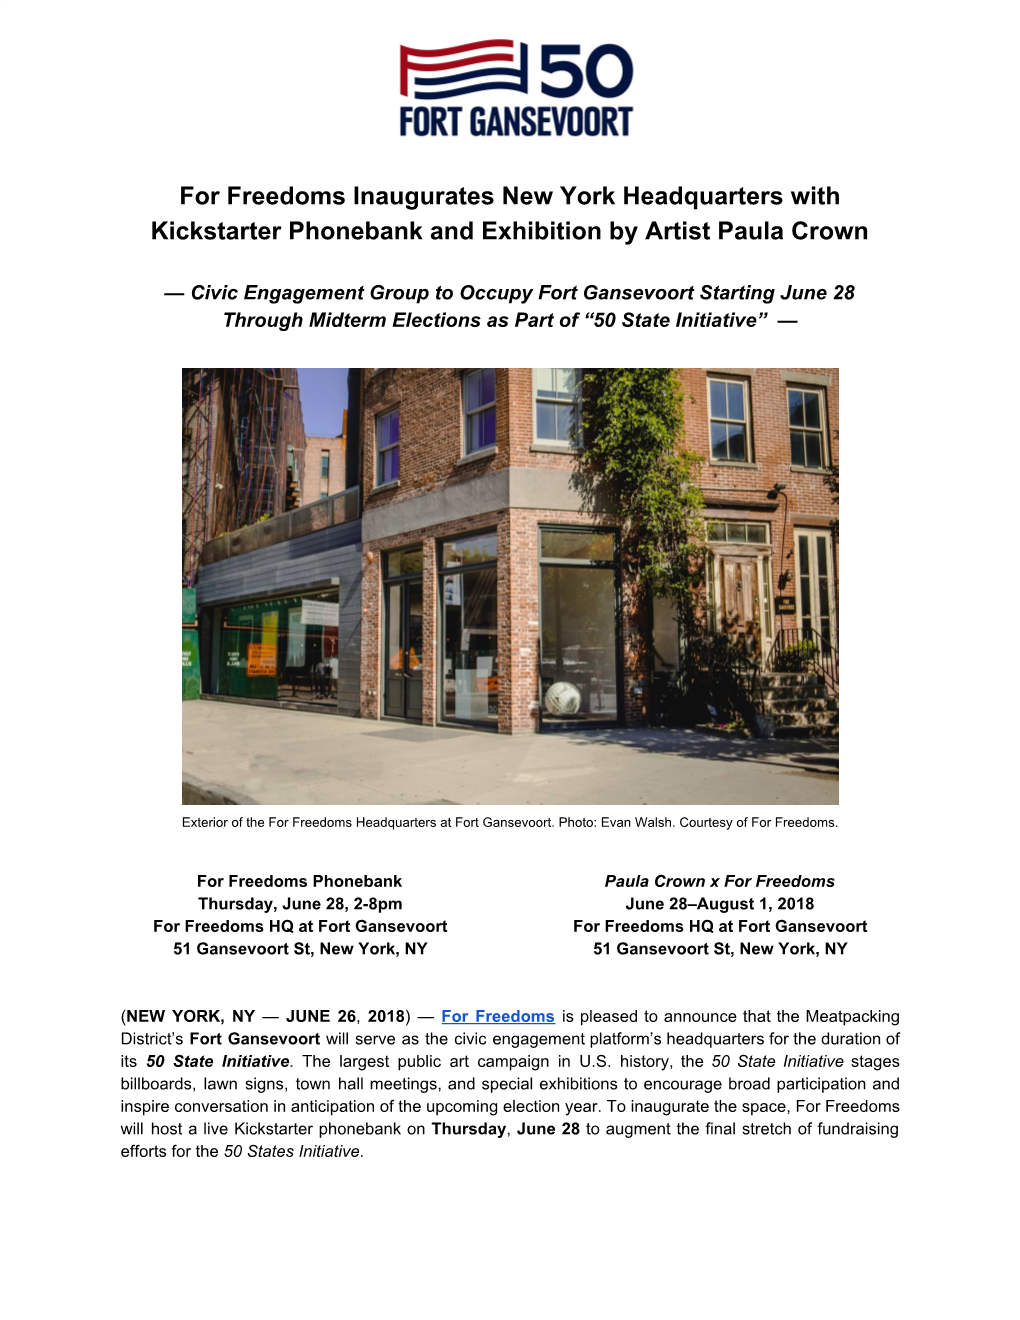 For Freedoms Inaugurates New York Headquarters with Kickstarter Phonebank and Exhibition by Artist Paula Crown